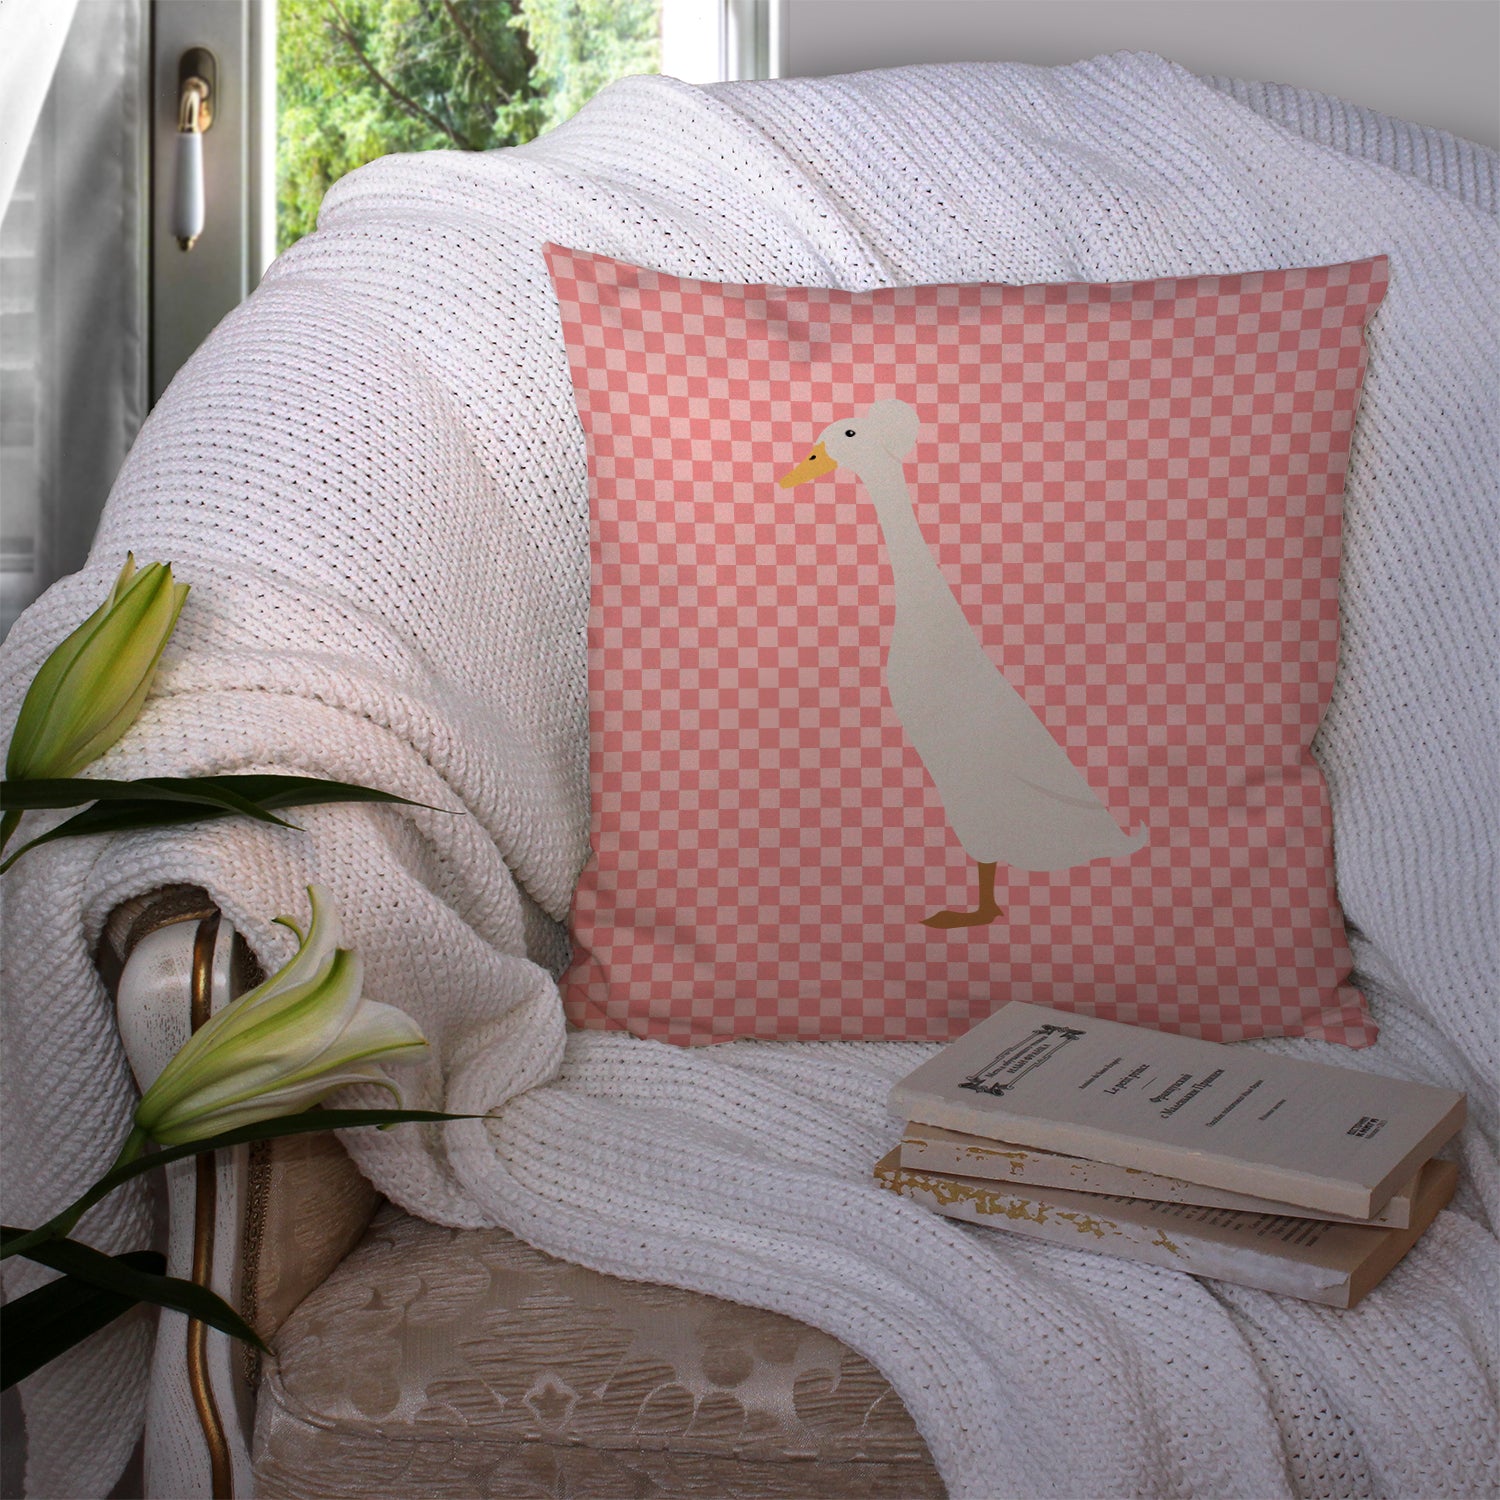 Bali Duck Pink Check Fabric Decorative Pillow BB7859PW1414 - the-store.com